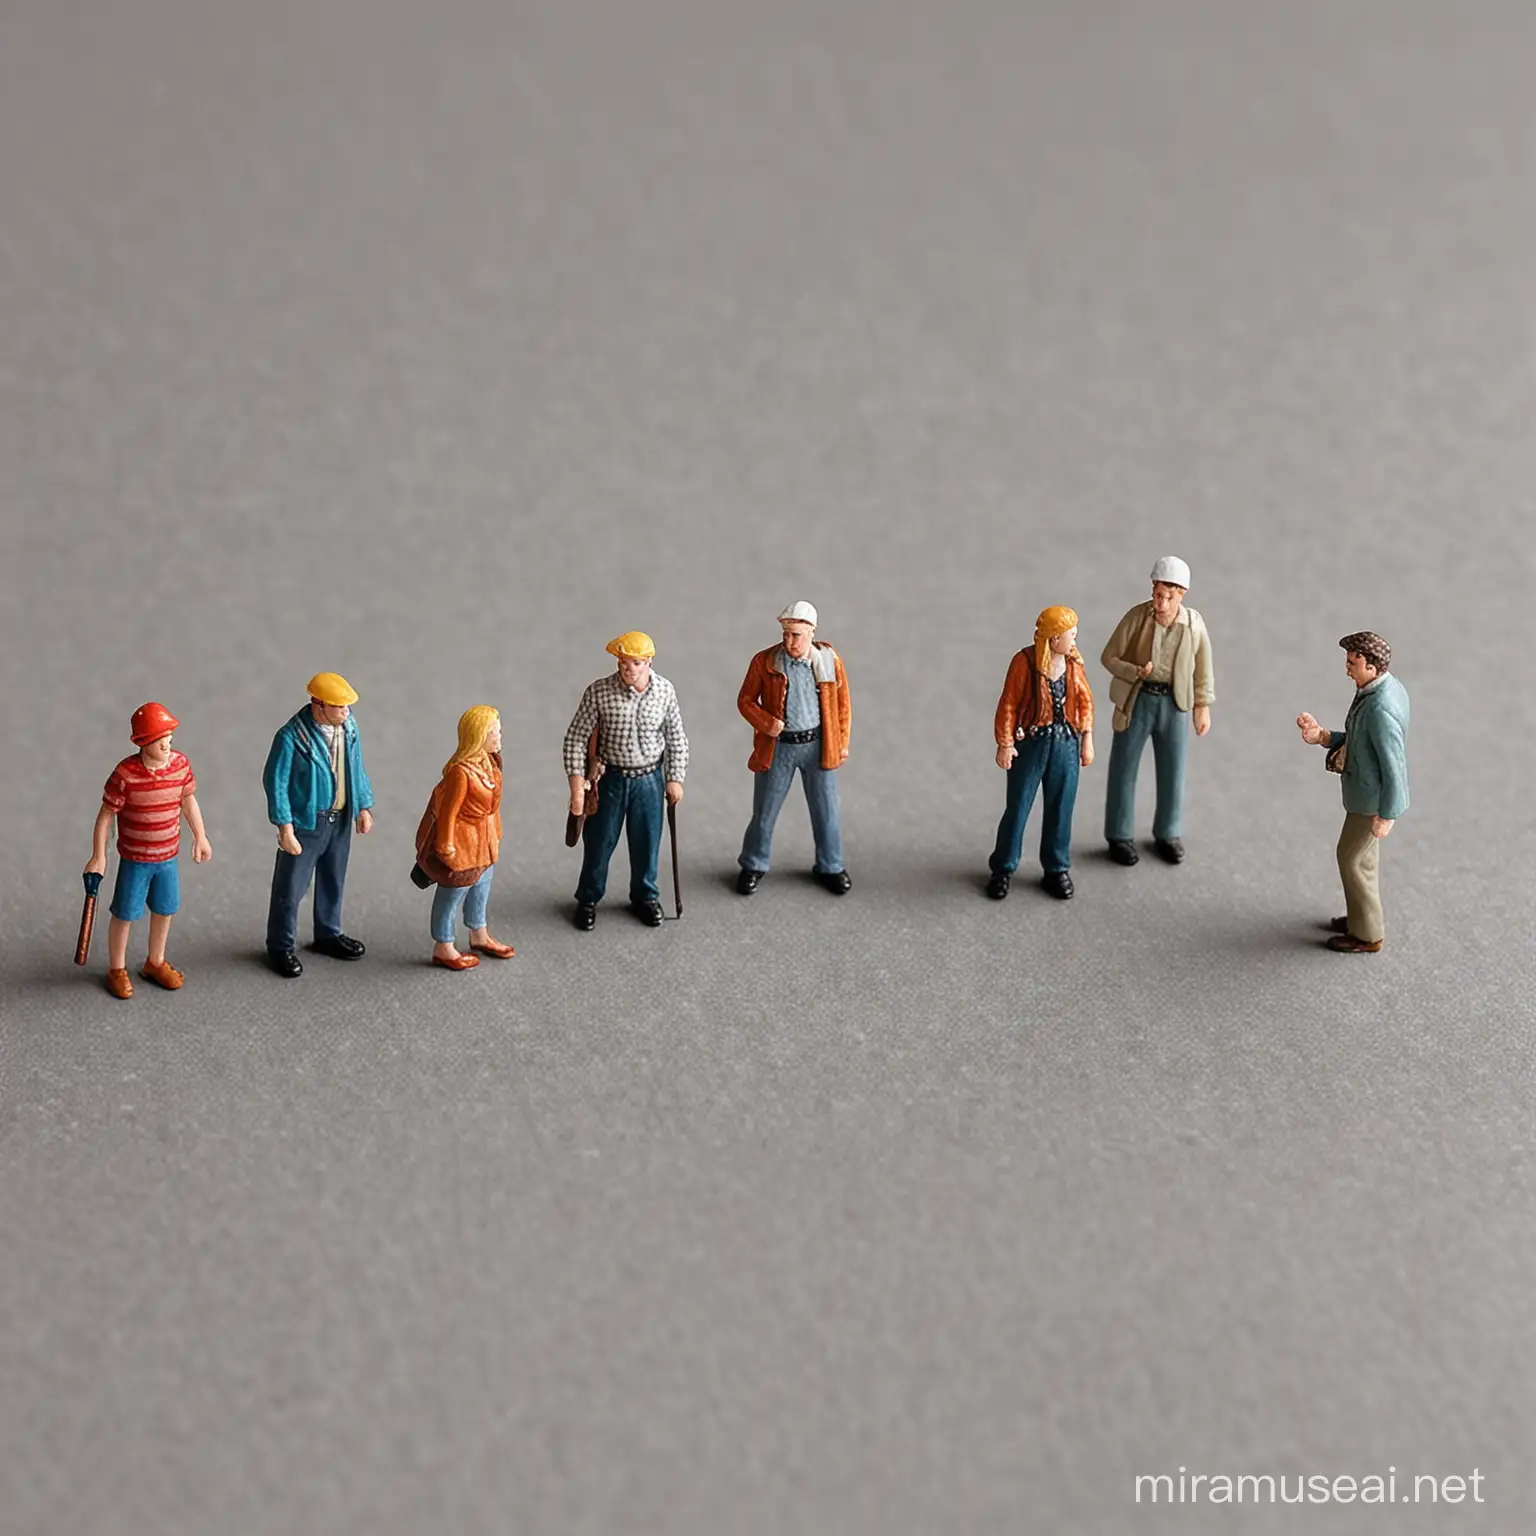 Colorful Miniature People in Vibrant Scenery